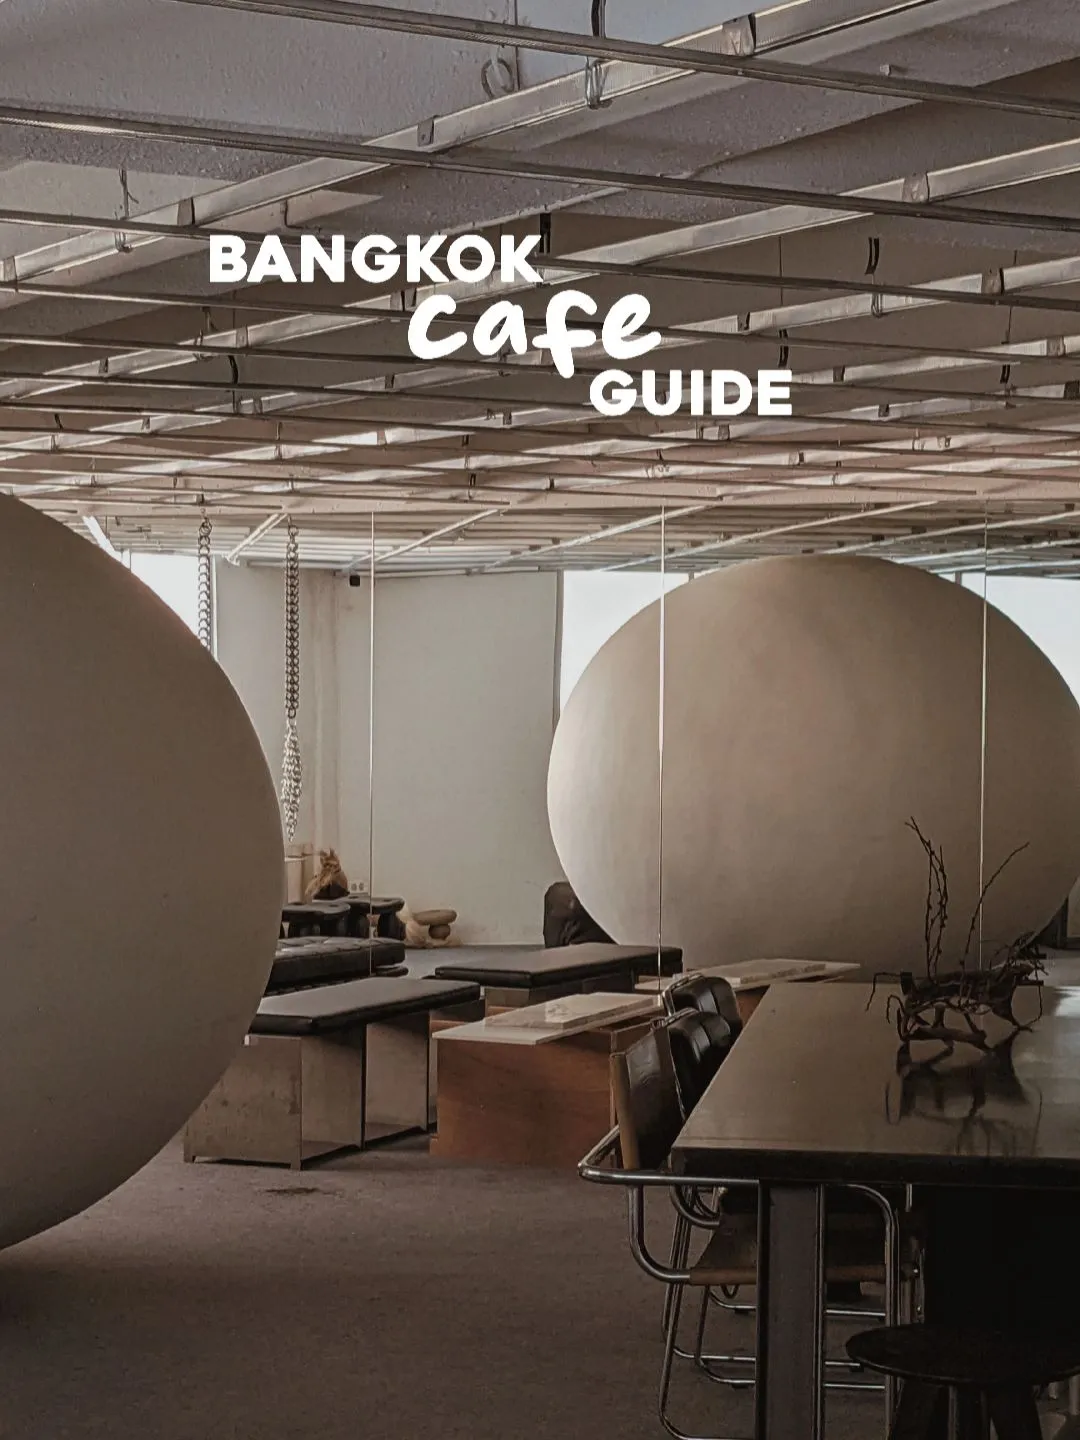 rating all the cafes i tried in bangkok ☕🇹🇭's images(0)